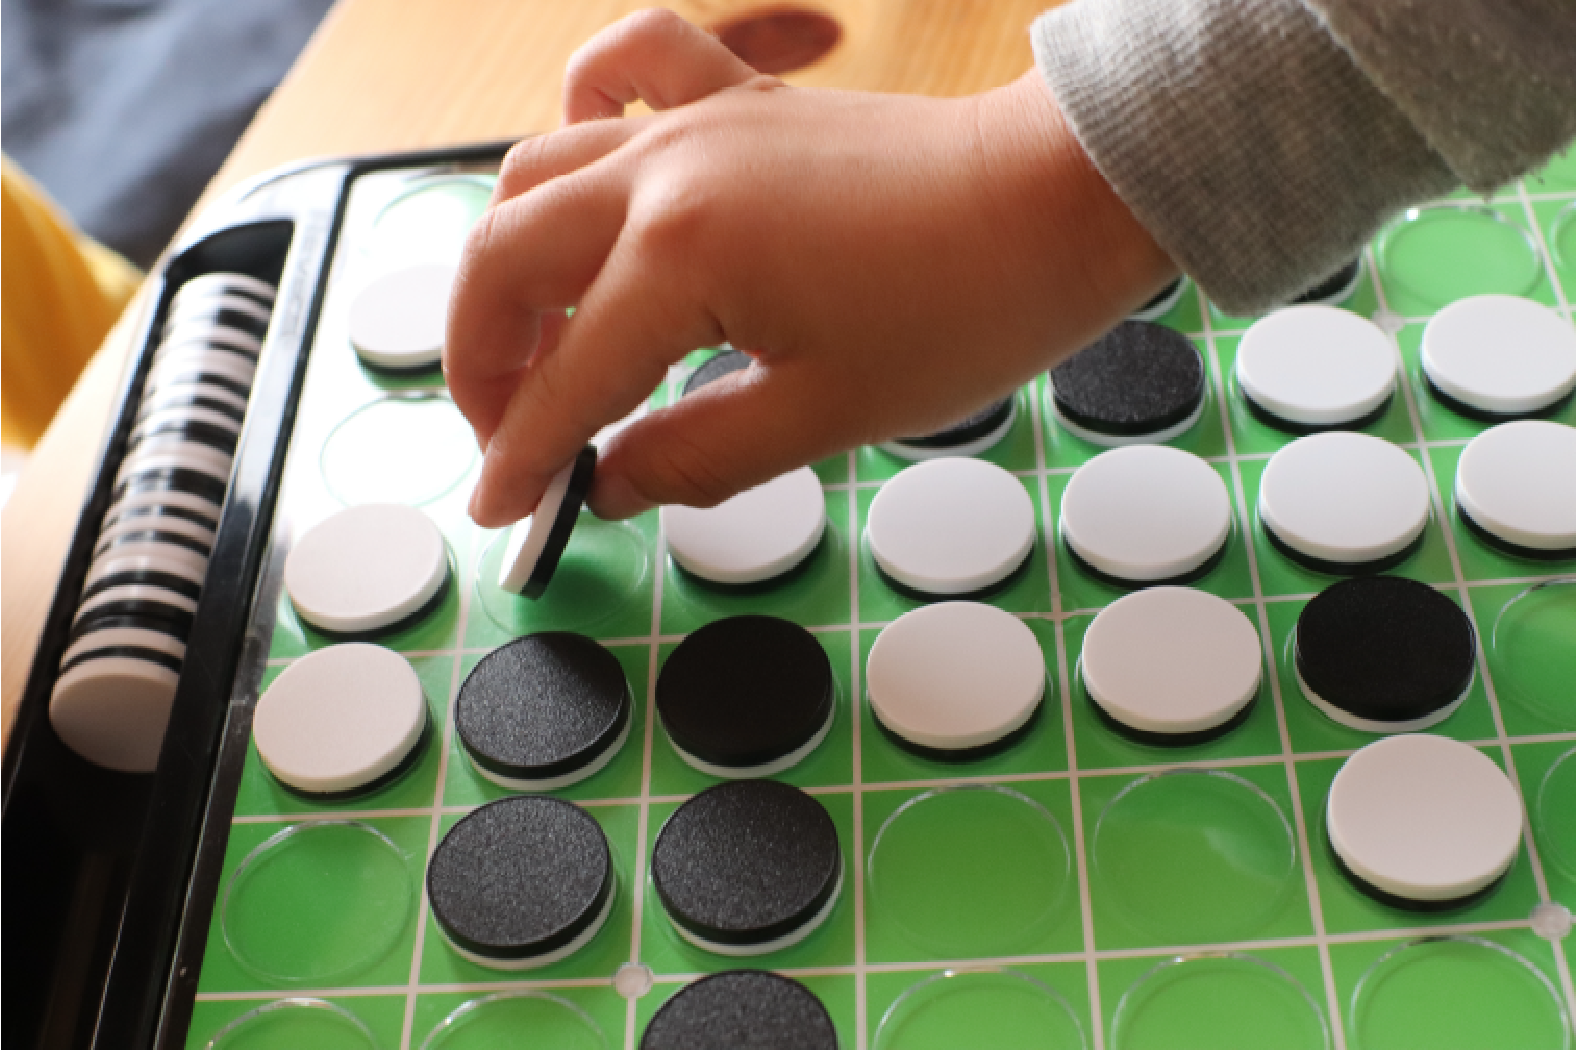 Playing the game Reversi or Othello.